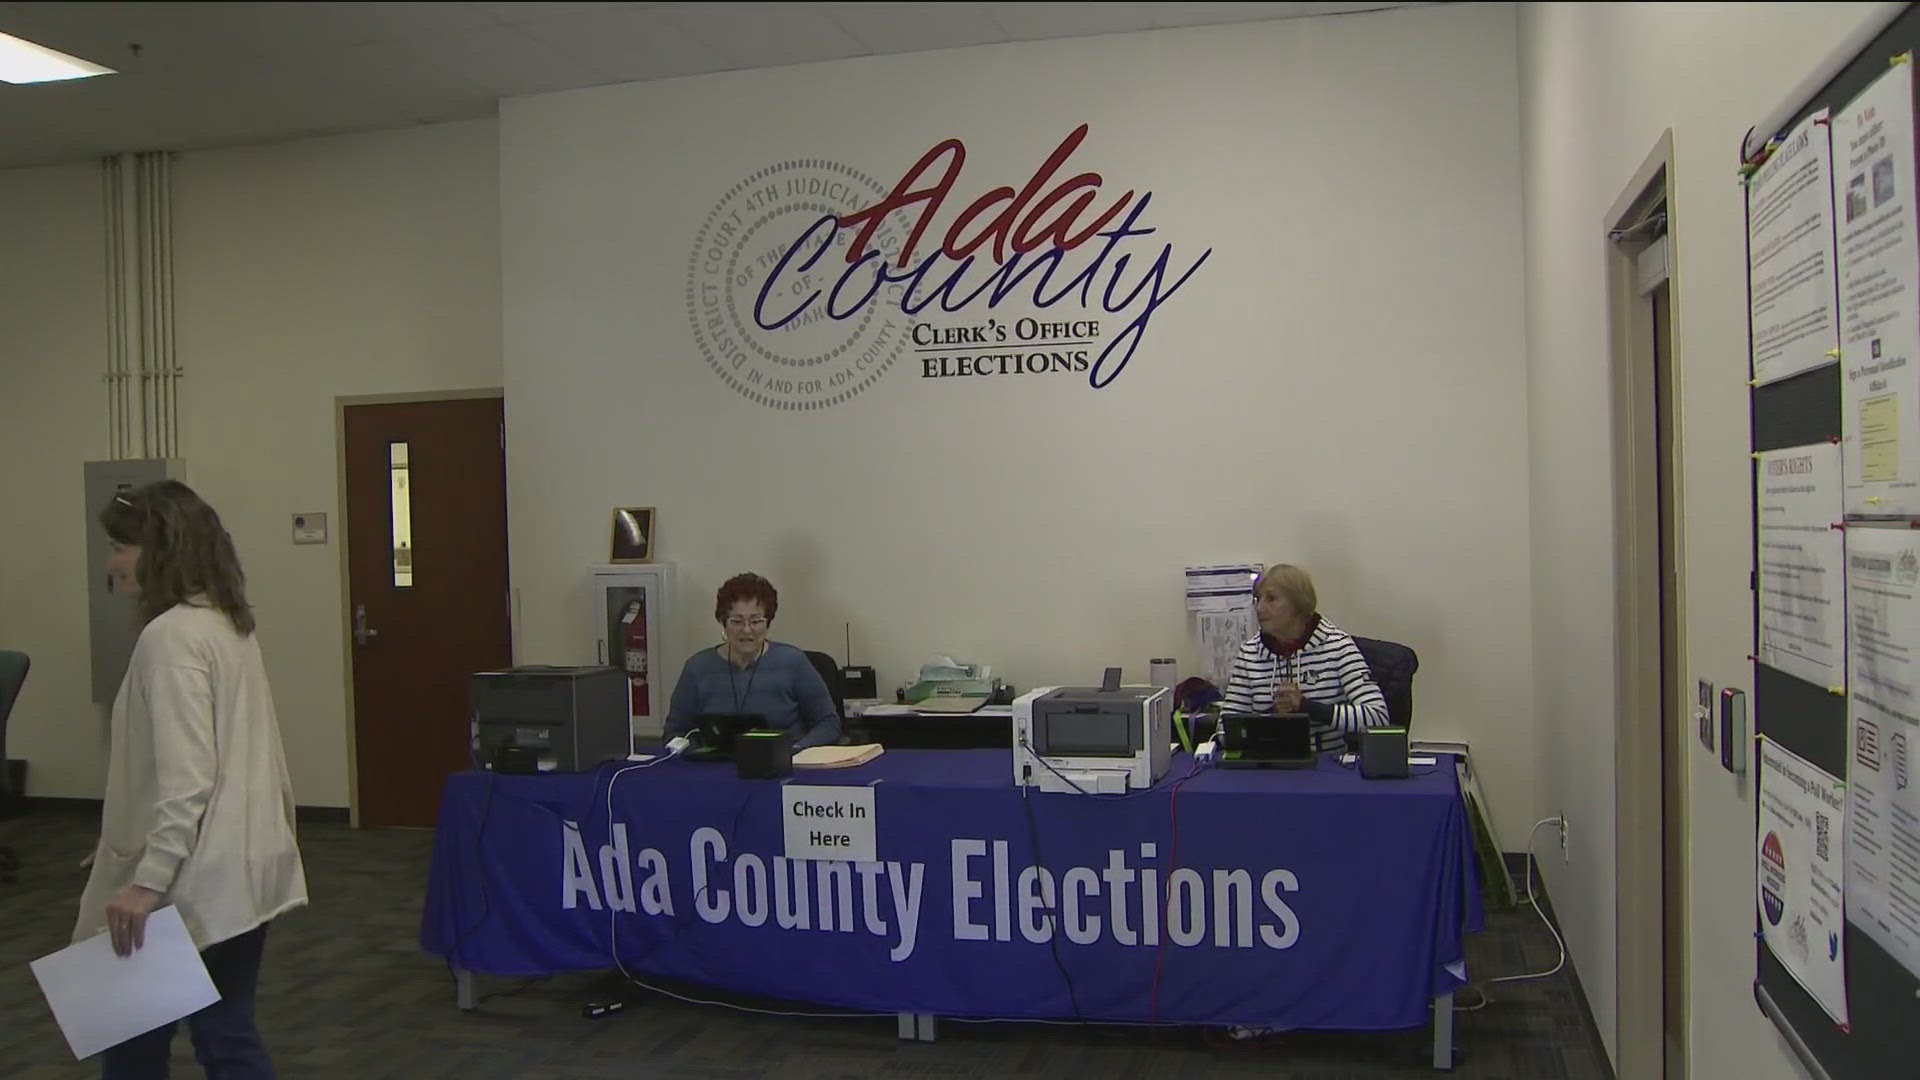 Voters have until 8 p.m. to get their votes in for the primary election.